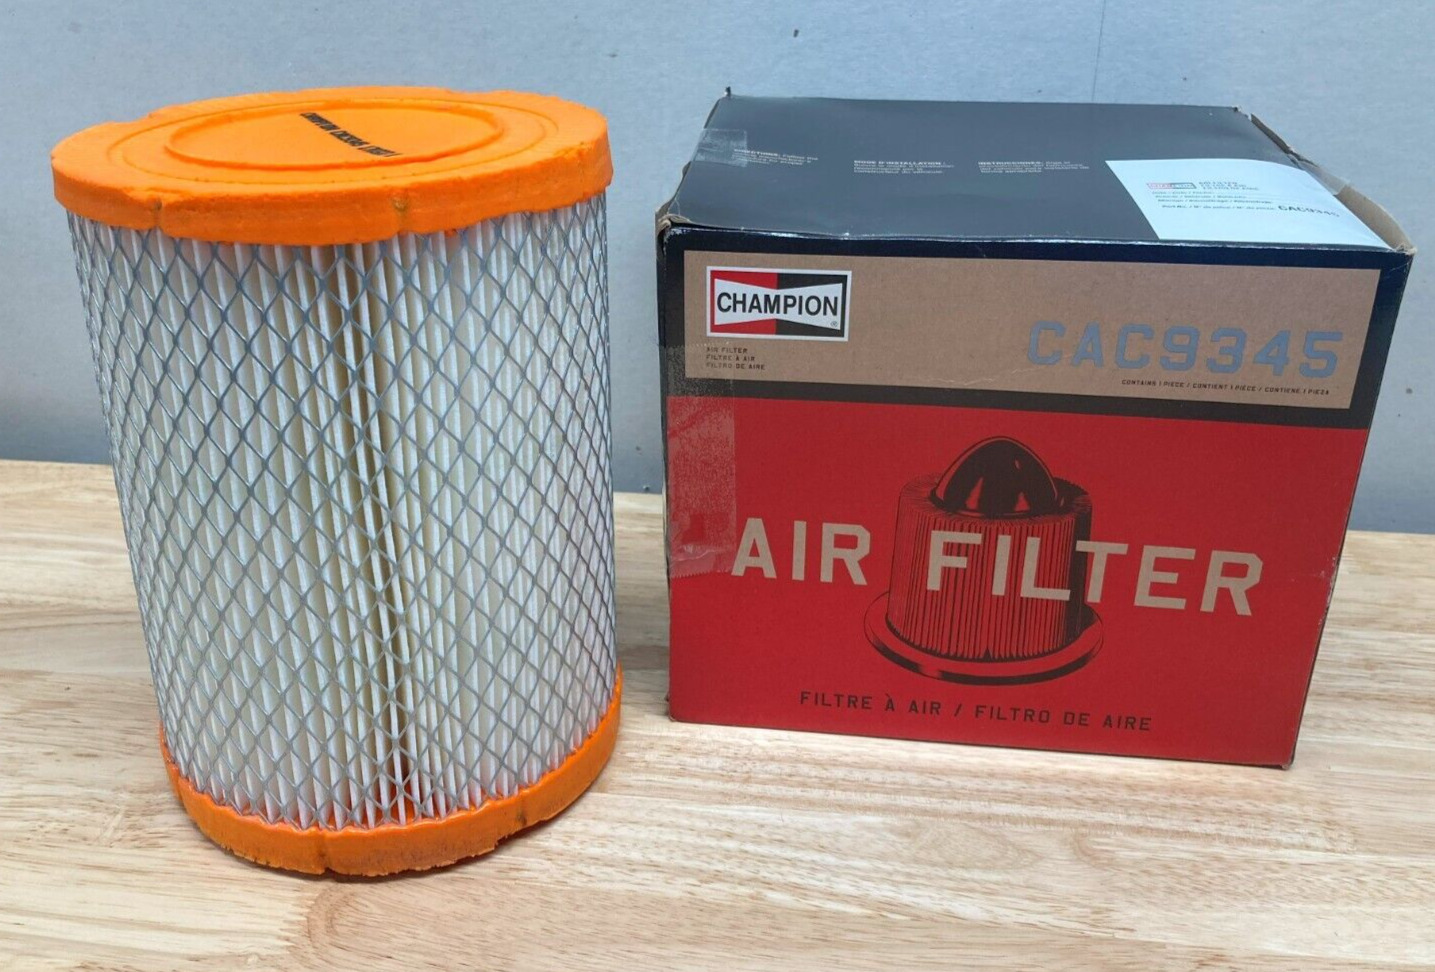 Champion CAC9345 Air Filter for CA9345 XA5433 A35433 42729 PA5433 8150361410